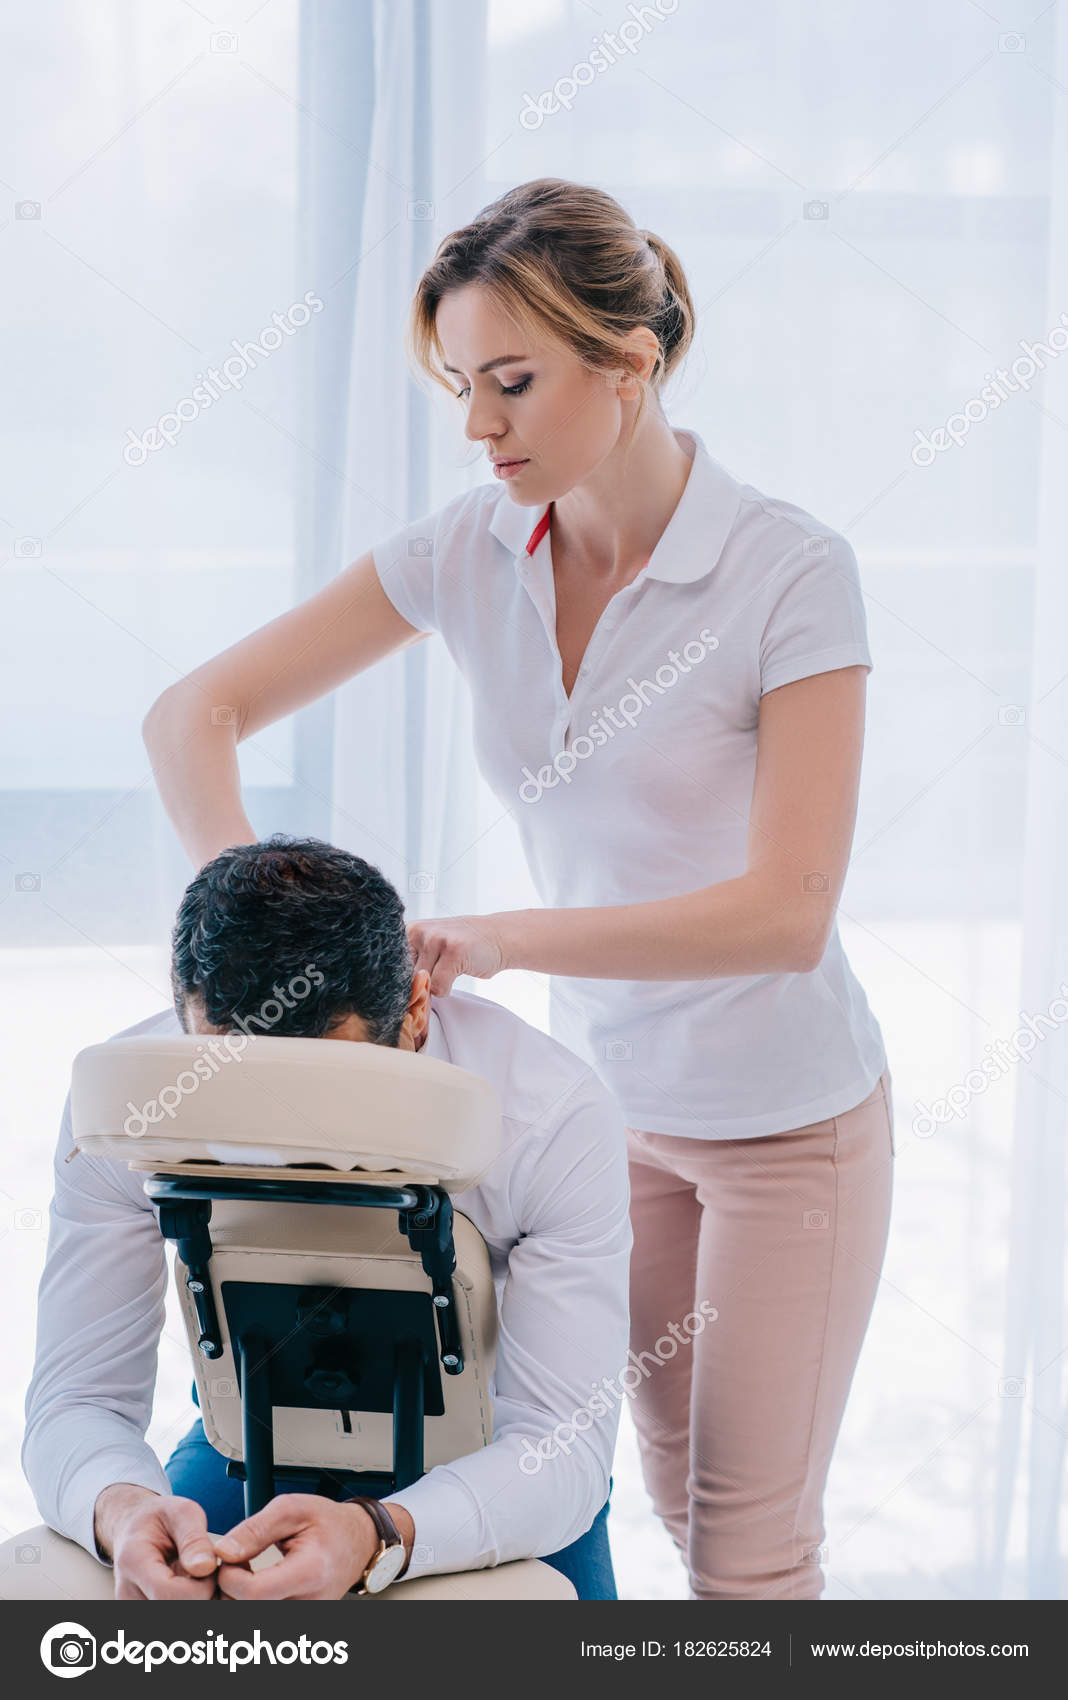 The masseur makes a relaxing massage of the trapezius muscles and back to  the client lying on the couch Stock Photo - Alamy